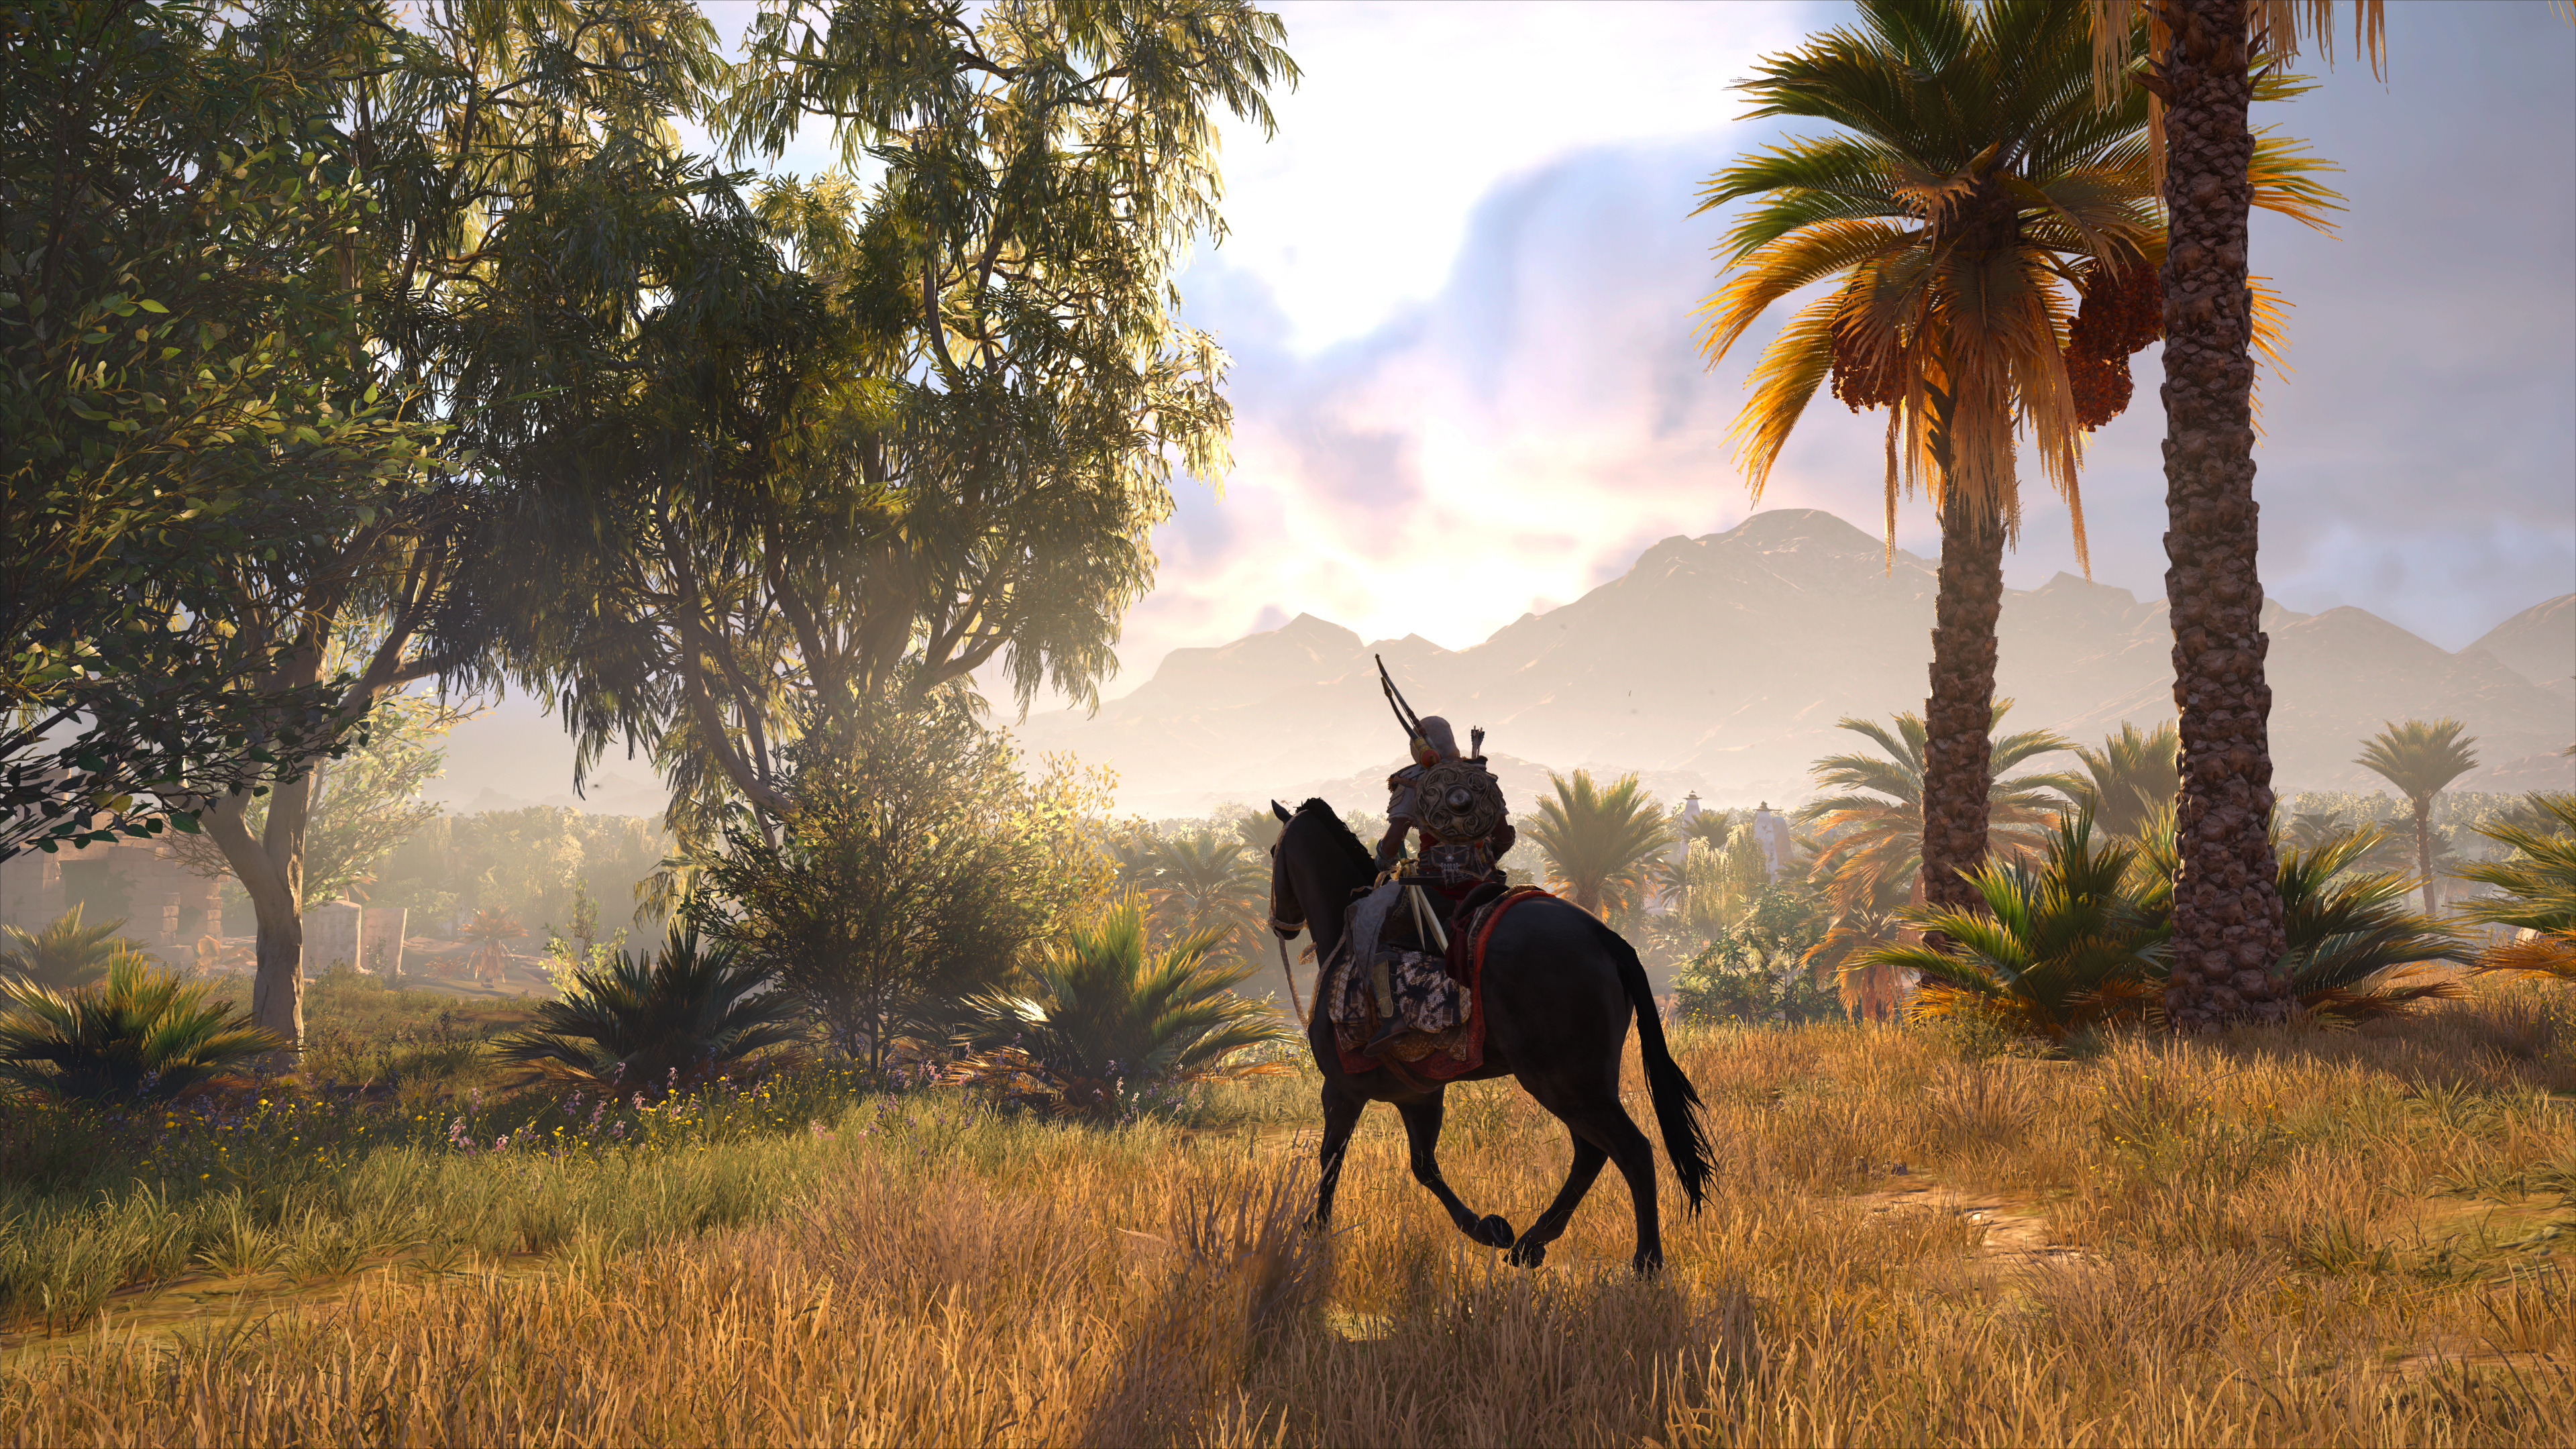 General 3840x2160 Assassin's Creed Assassin's Creed: Origins video games horse palm trees trees nature Egypt Bayek video game characters Ubisoft